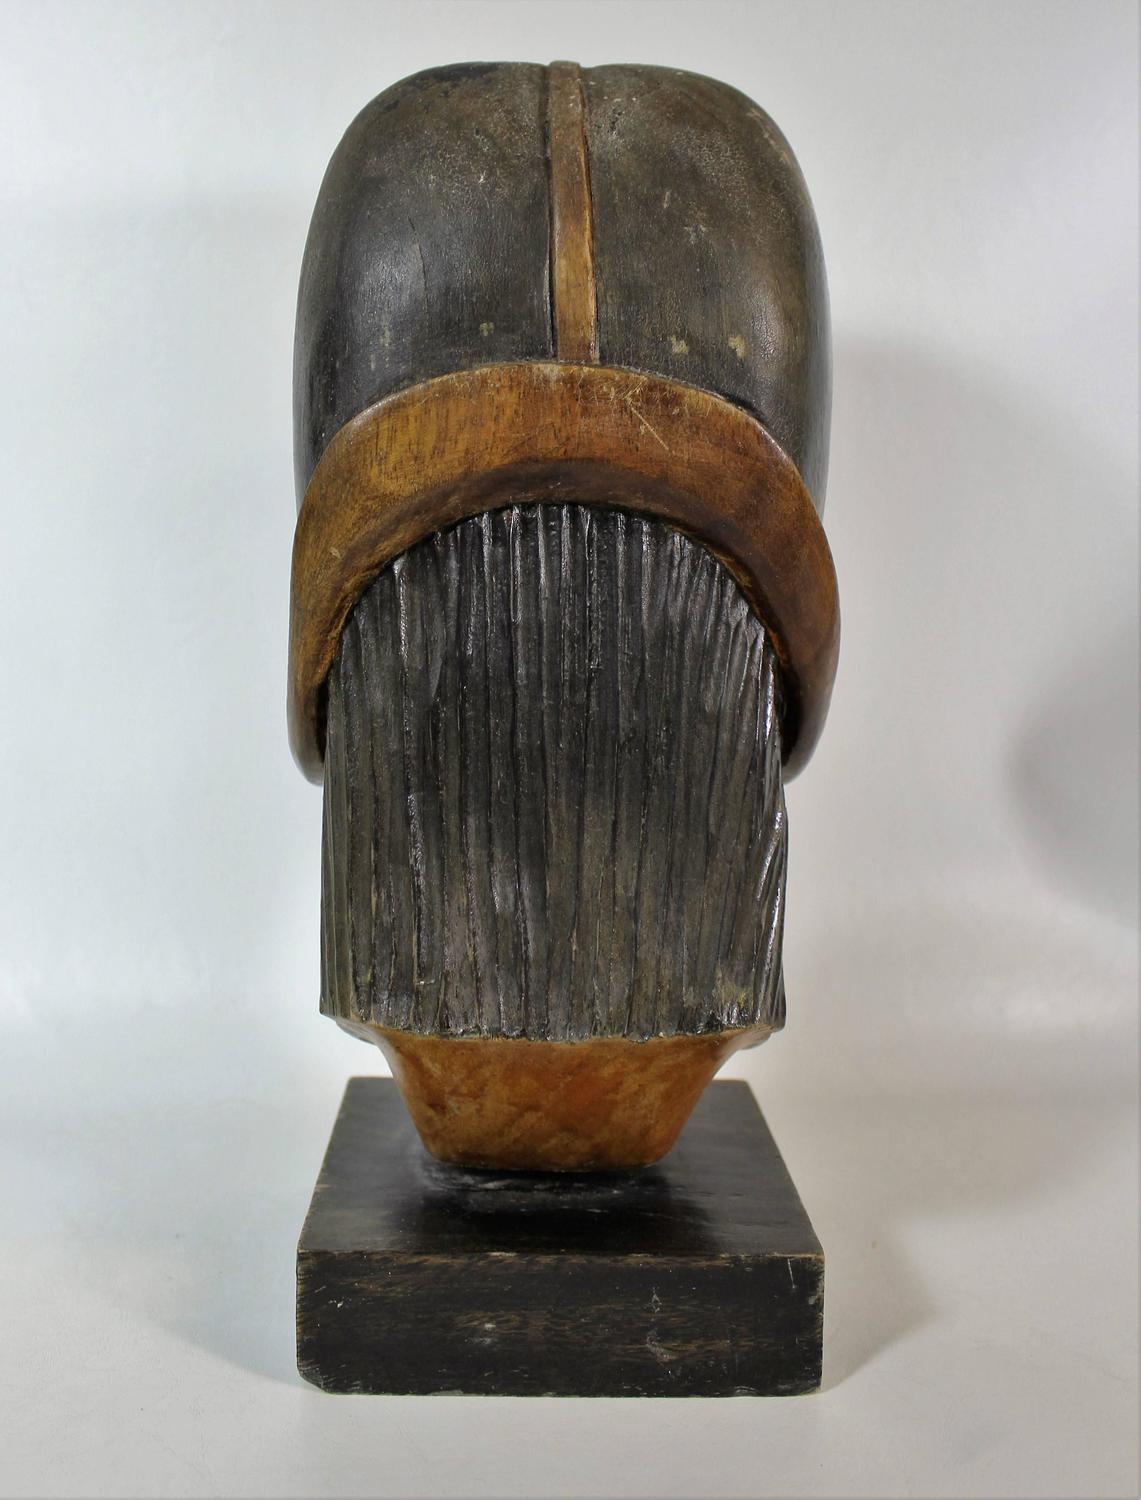 19th Century Native Yampara Carved Wood Bust/Sculpture For Sale at 1stdibs